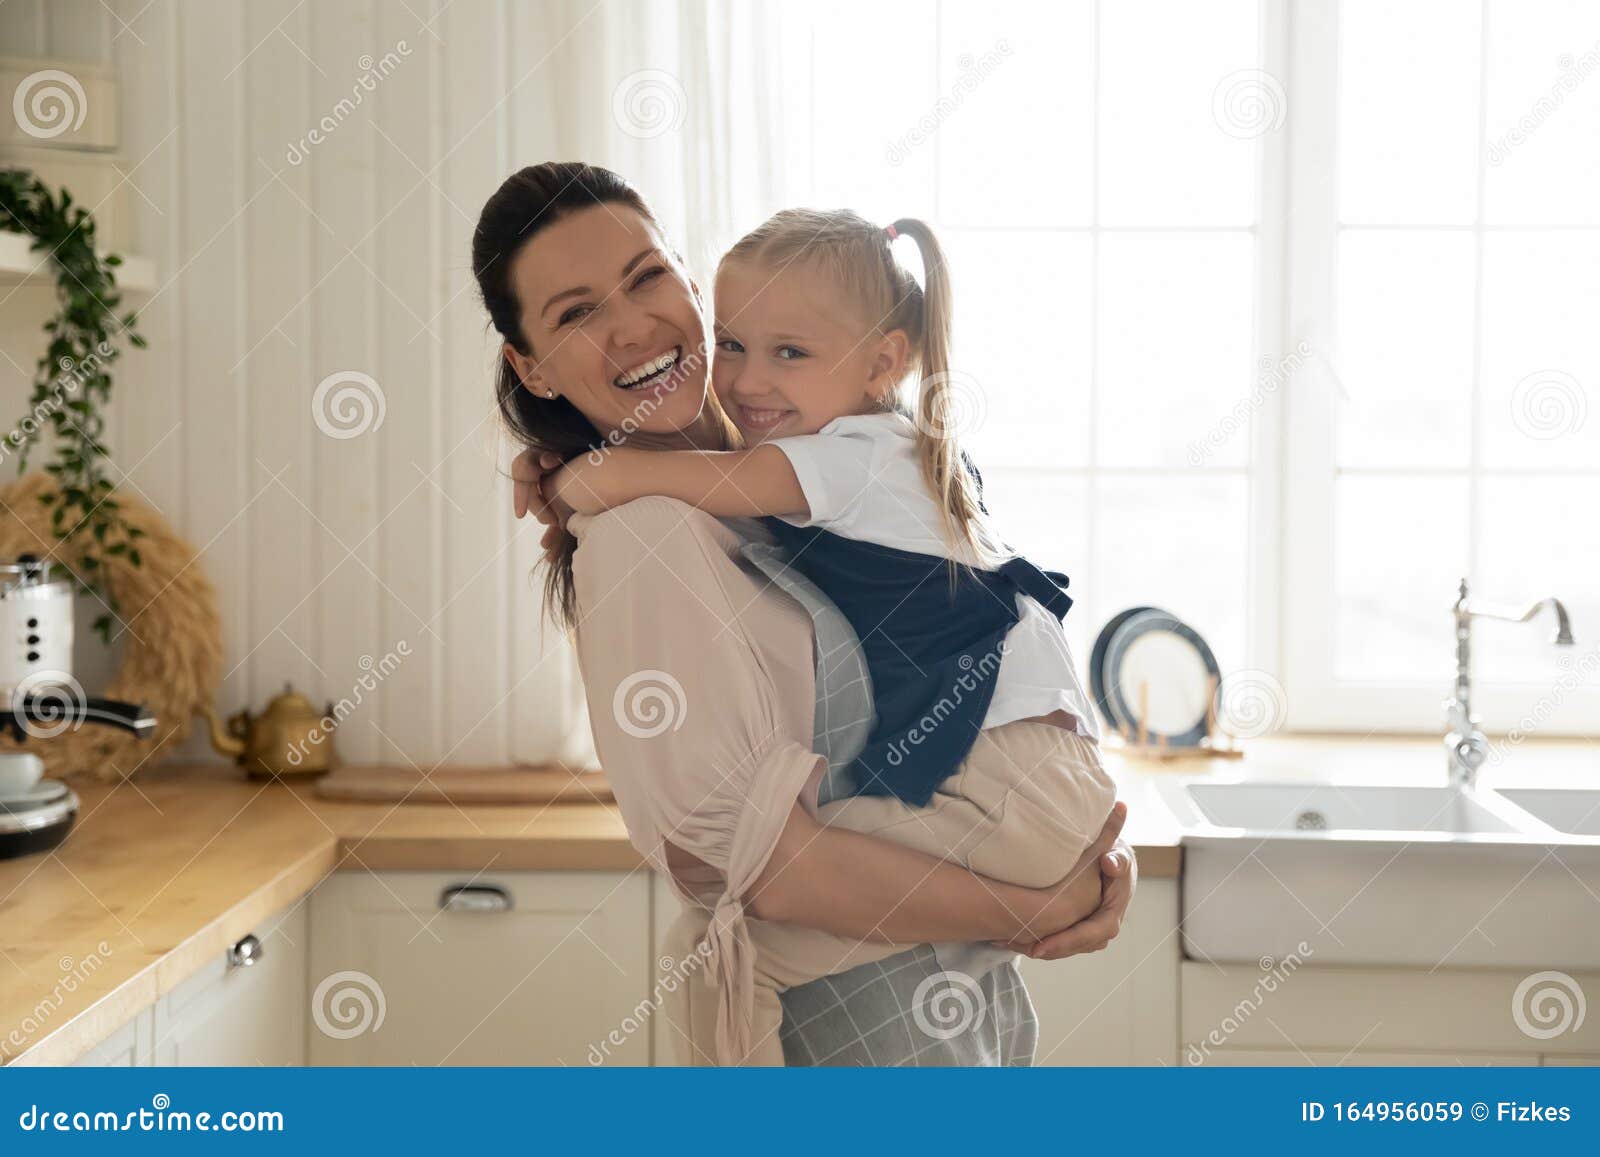 house wife with daughter